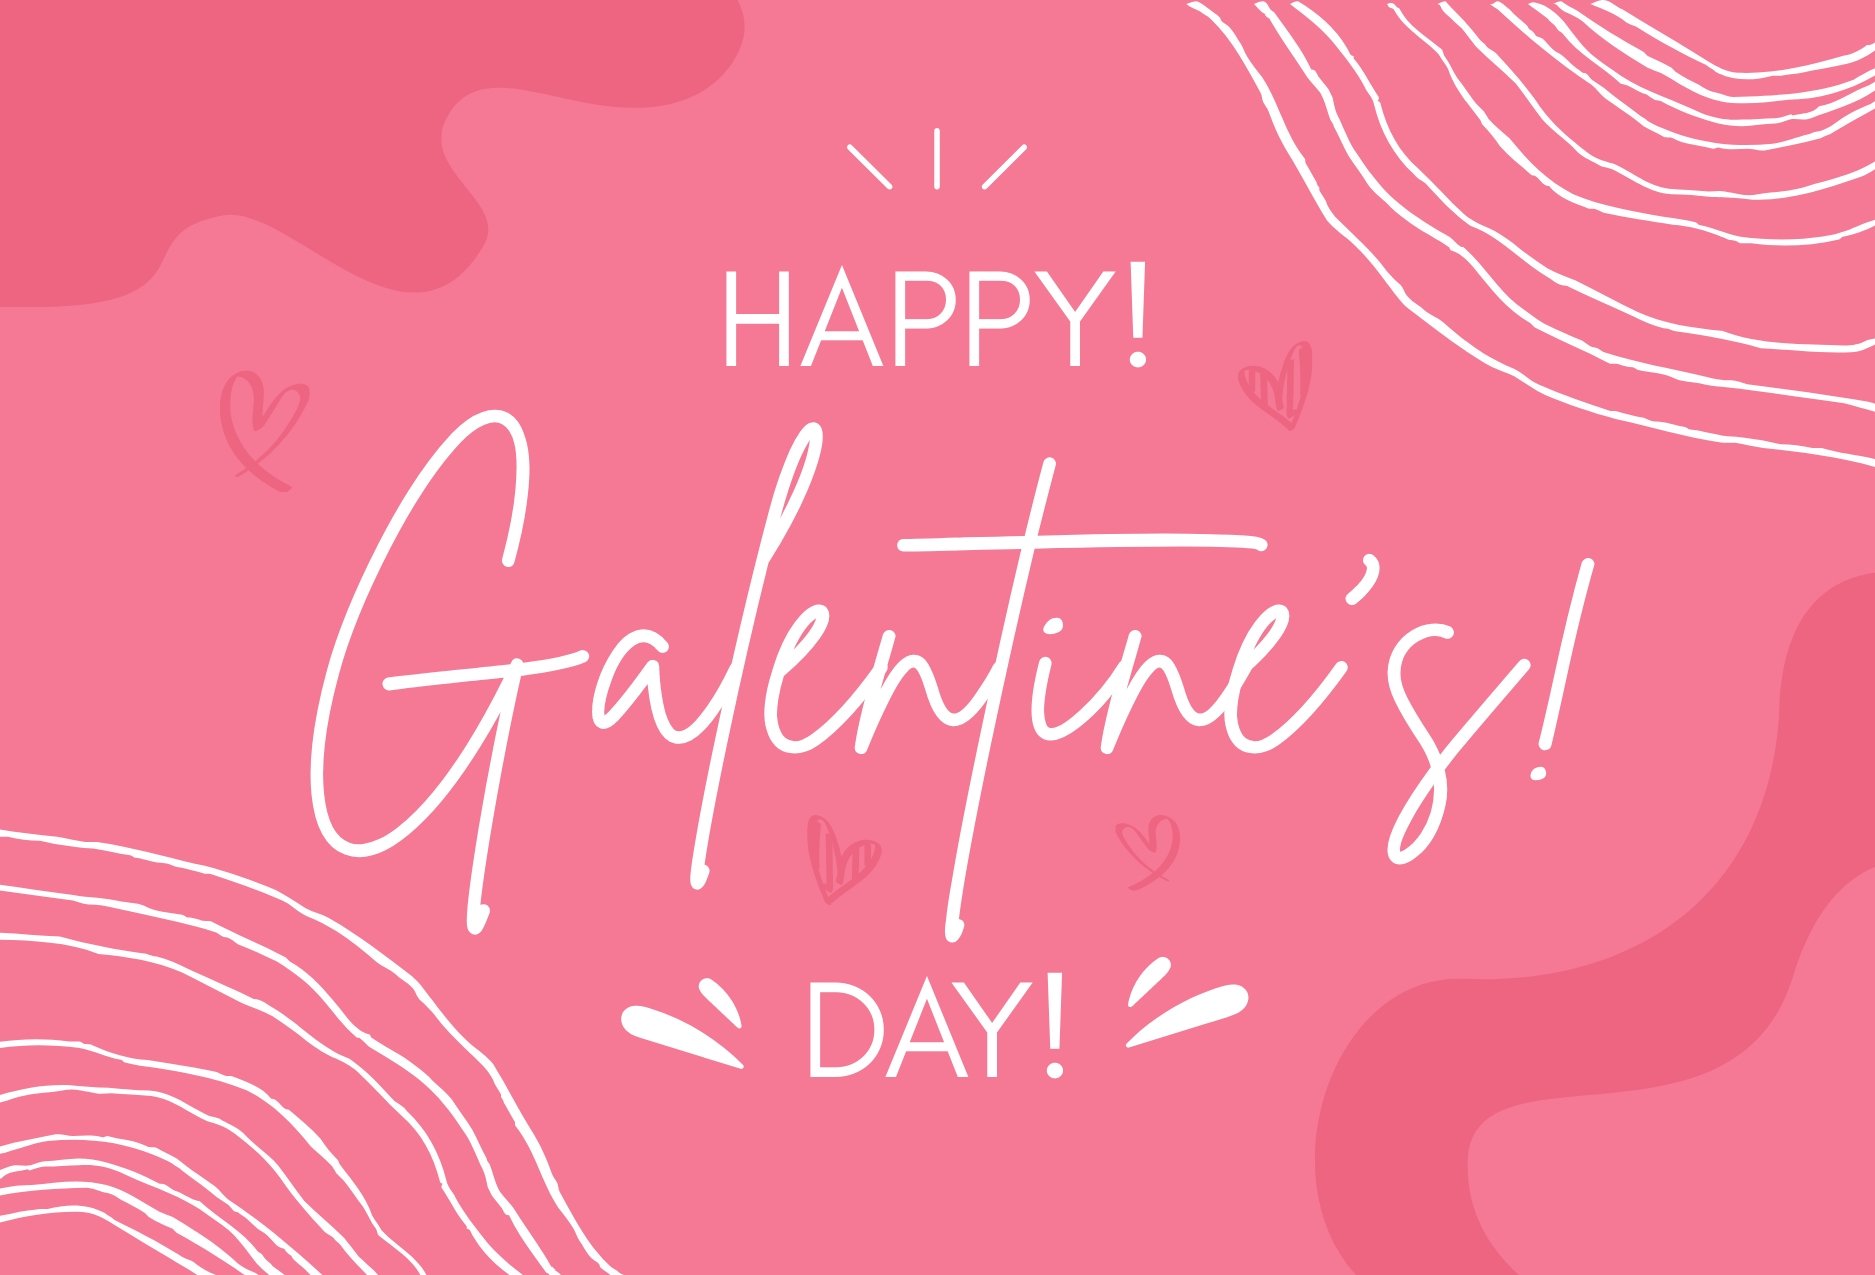 FREE Galentine's Day Card Templates & Examples Edit Online & Download